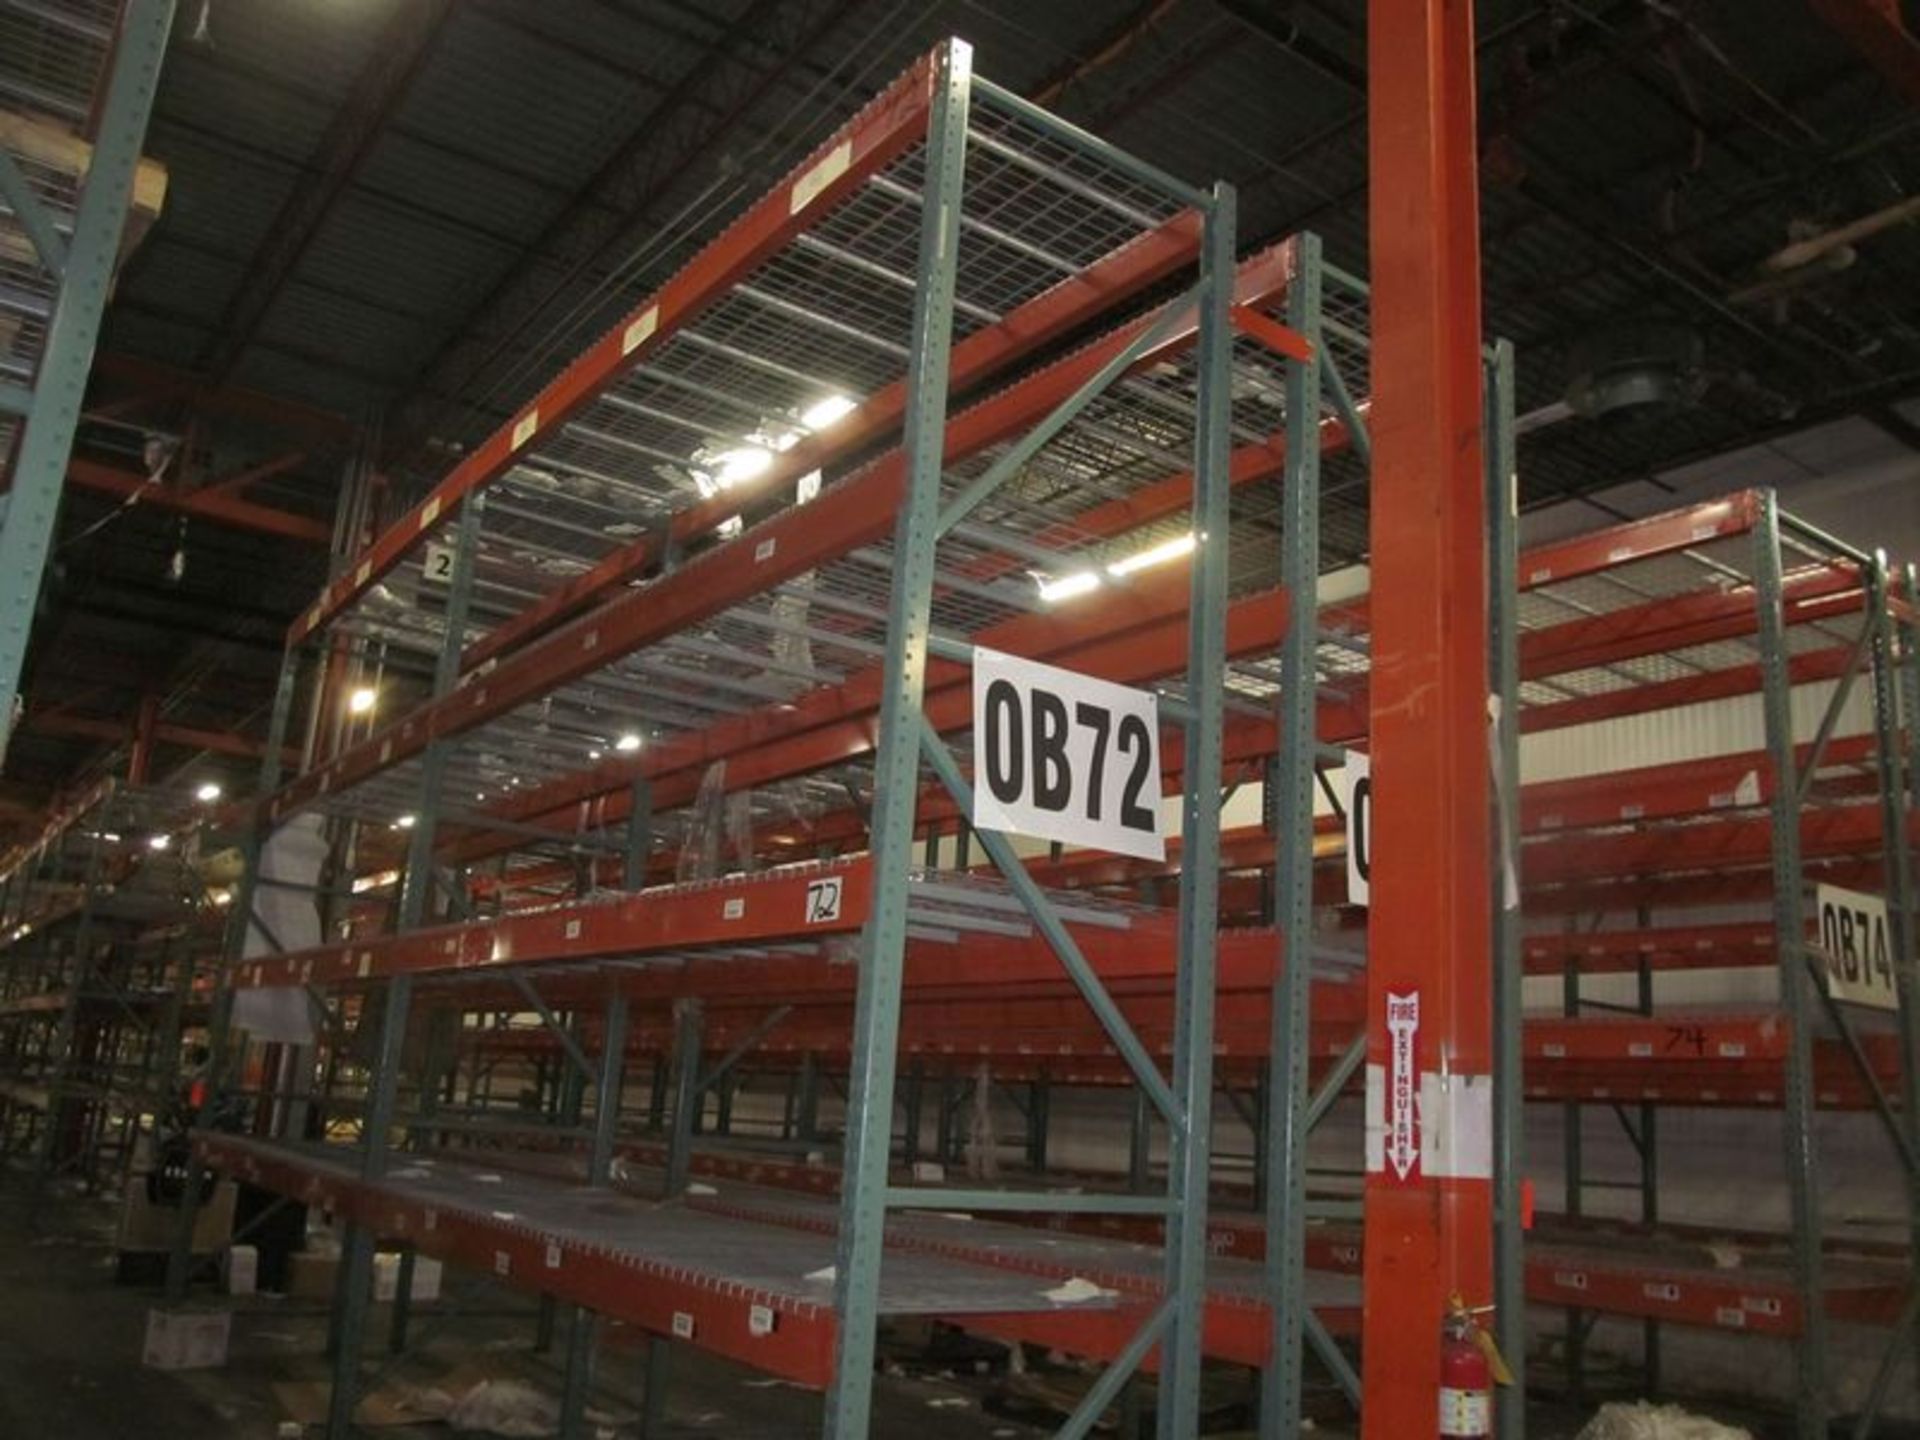 Lot of (16) sections Interack cup style pallet rack, (20) 14' high, 3" x 3" uprights, (128) 12'